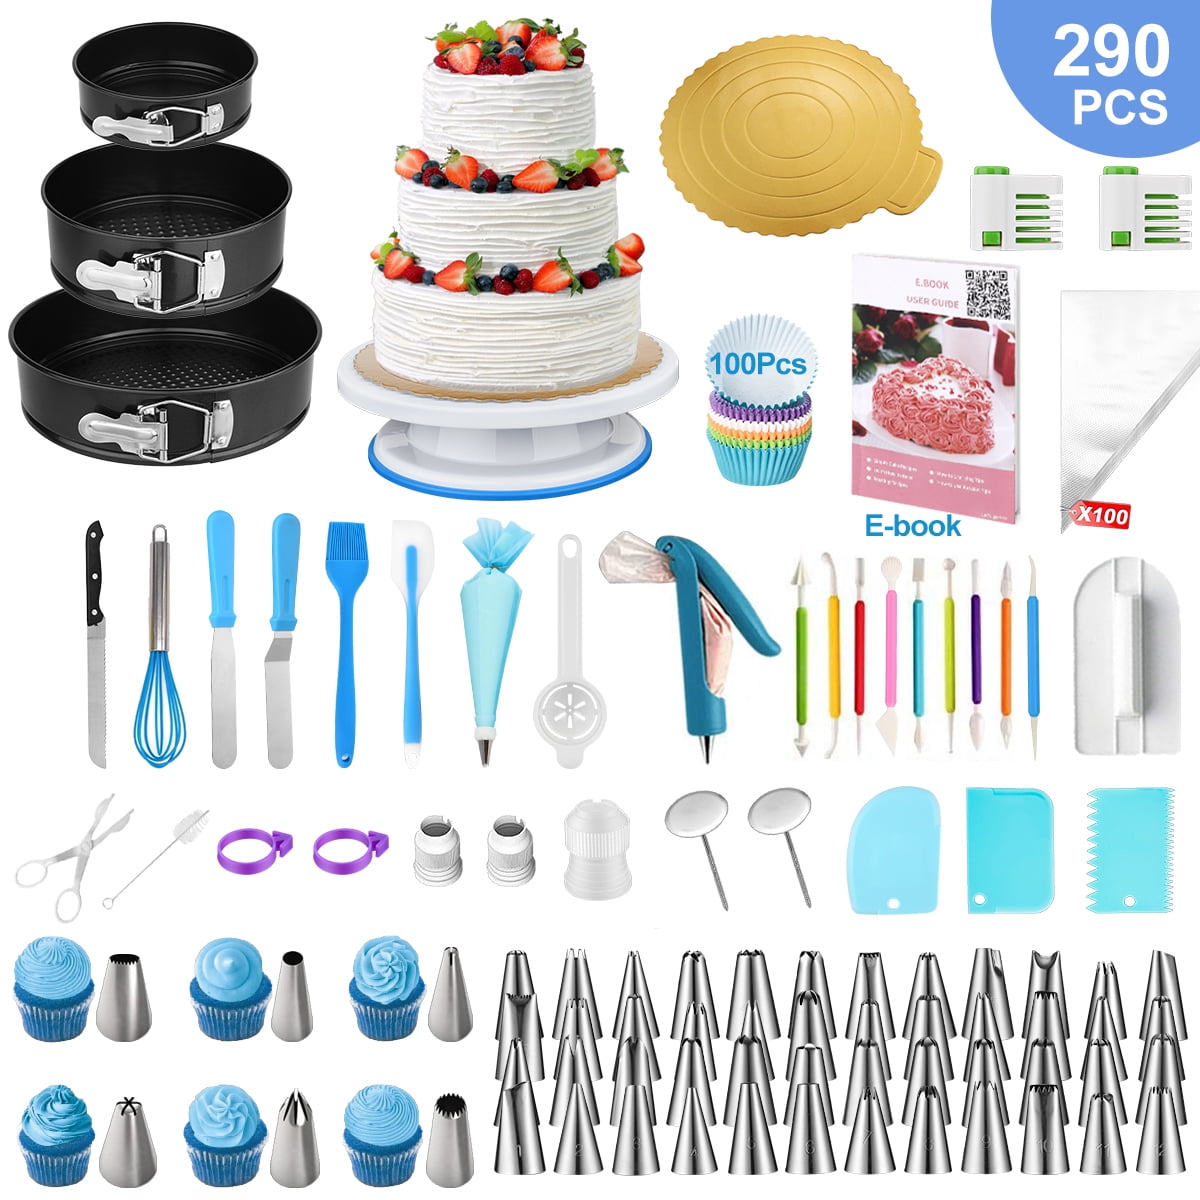 Essential Cake Decorating Tools - A Beginner's Guide